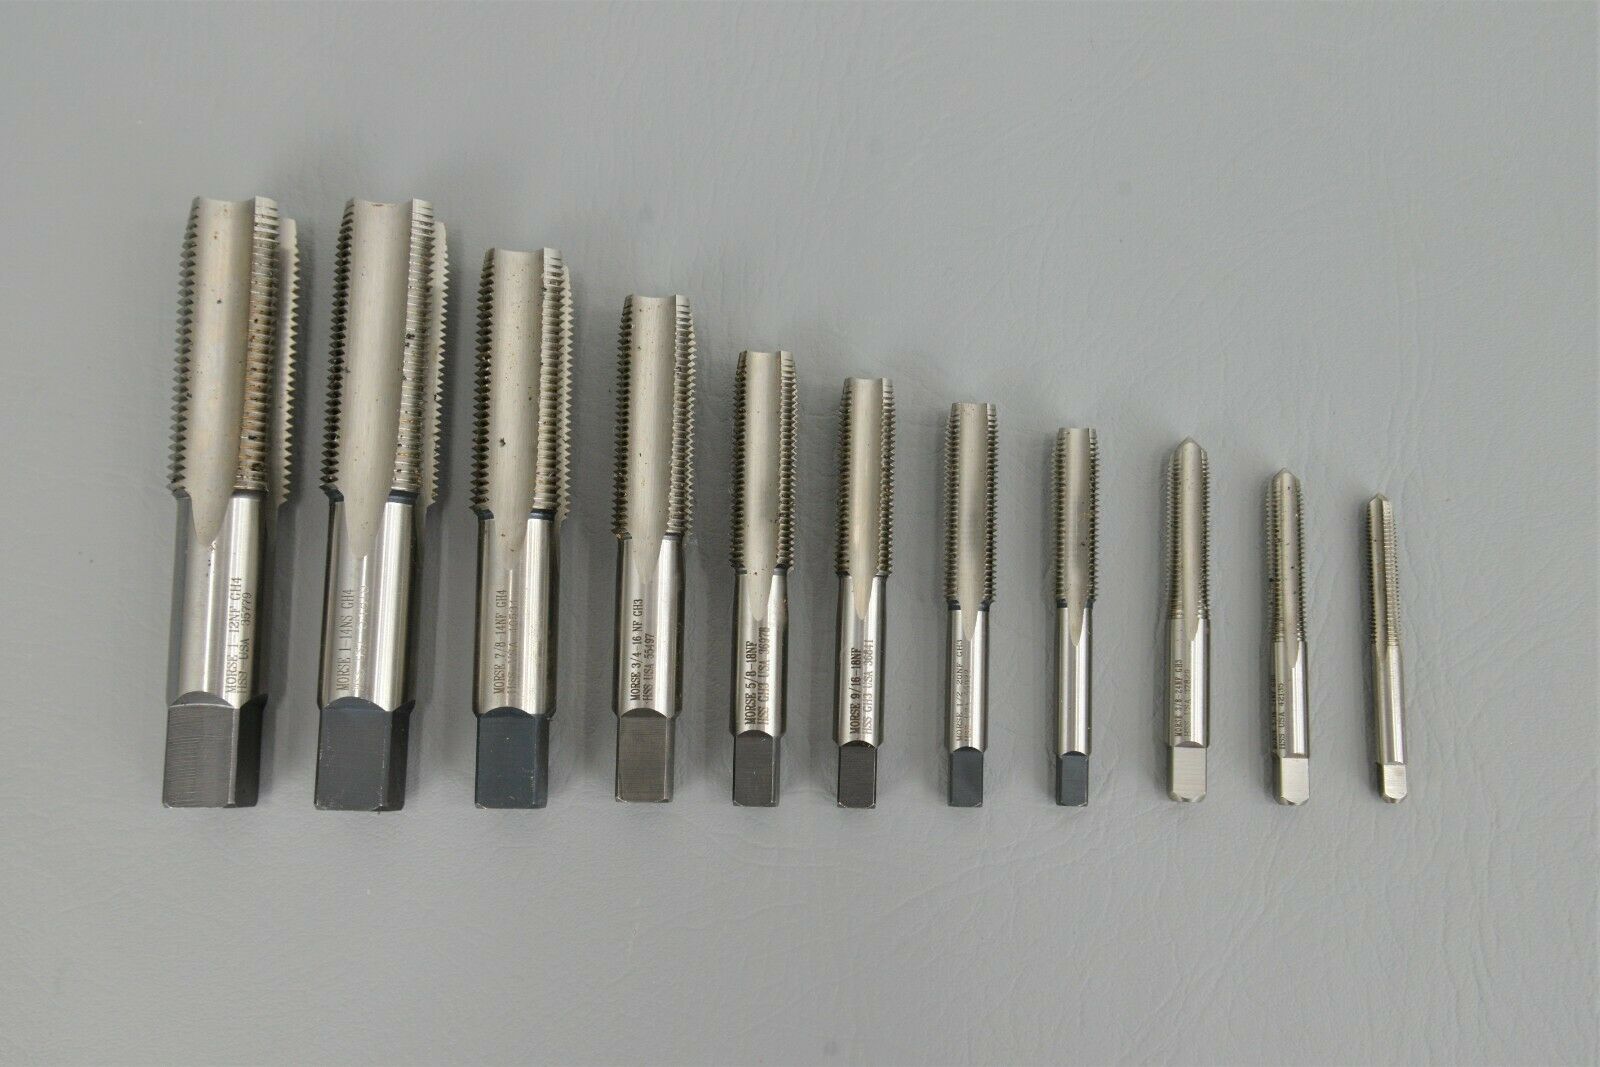 New 1pc HSS Machine 1/4-27 UNS Plug Tap and 1pc 1/4-27 UNS Die Threading Tool